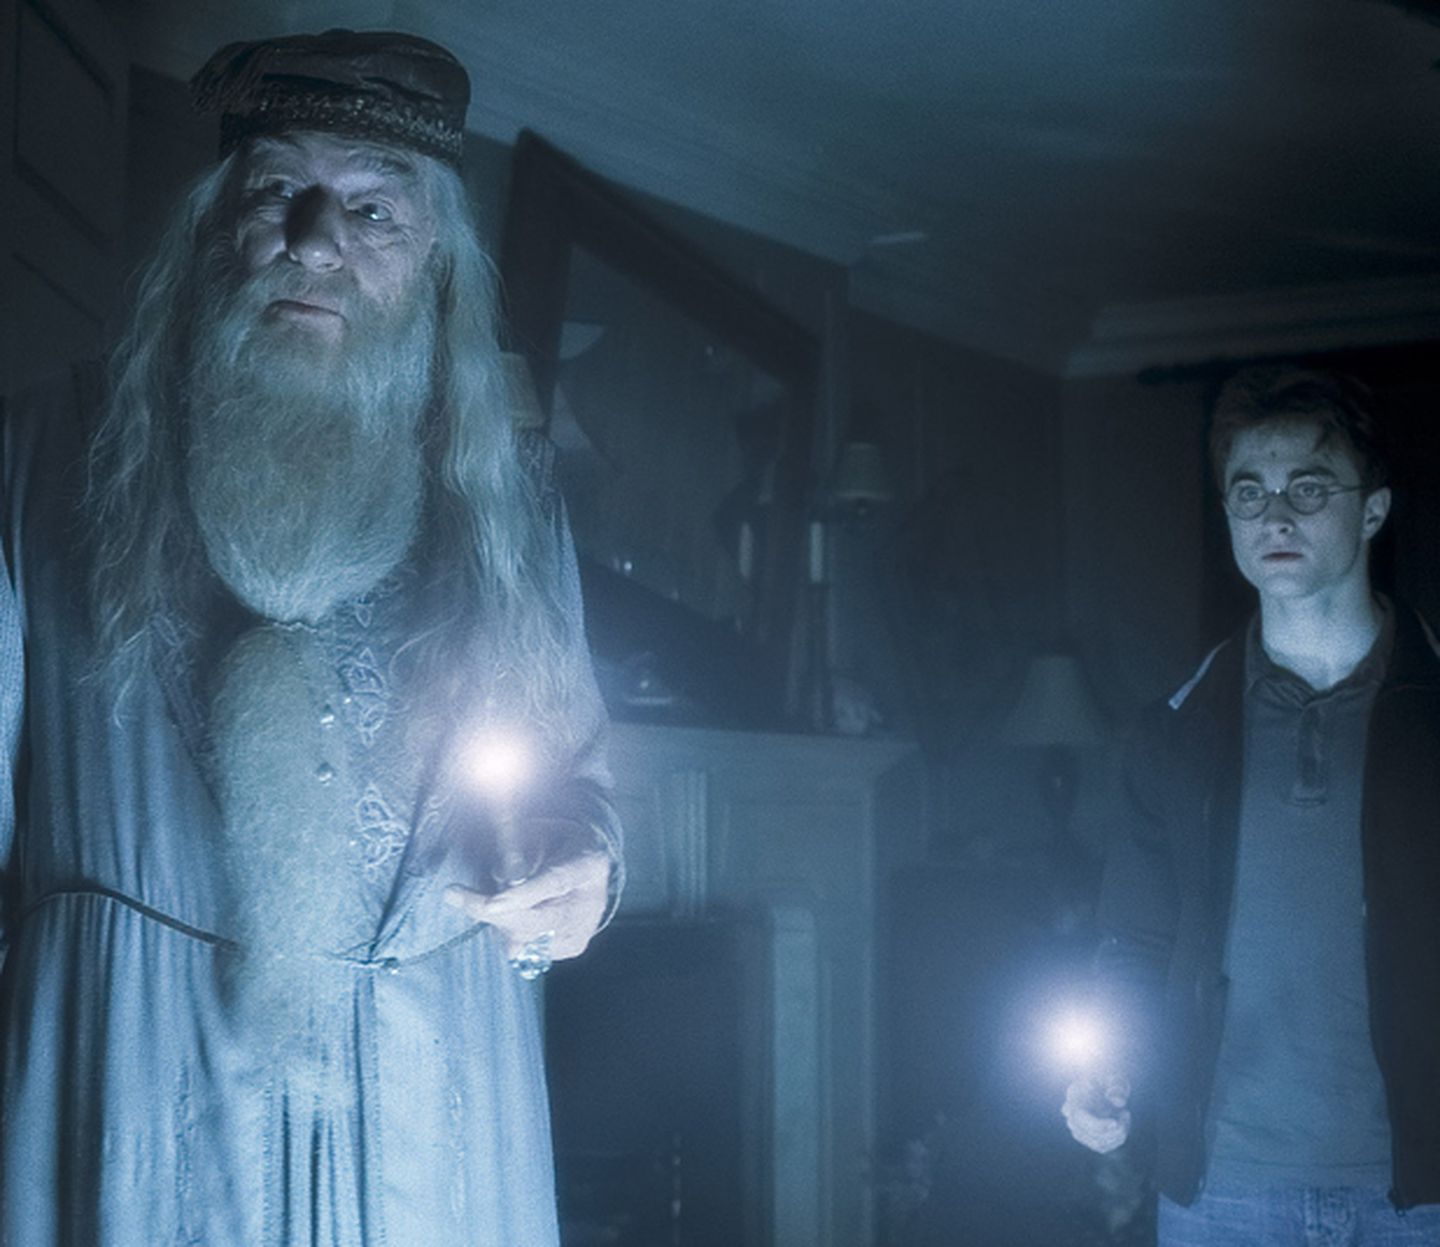 Dumbledore and Harry Potter stand in a dark room with wands alight.